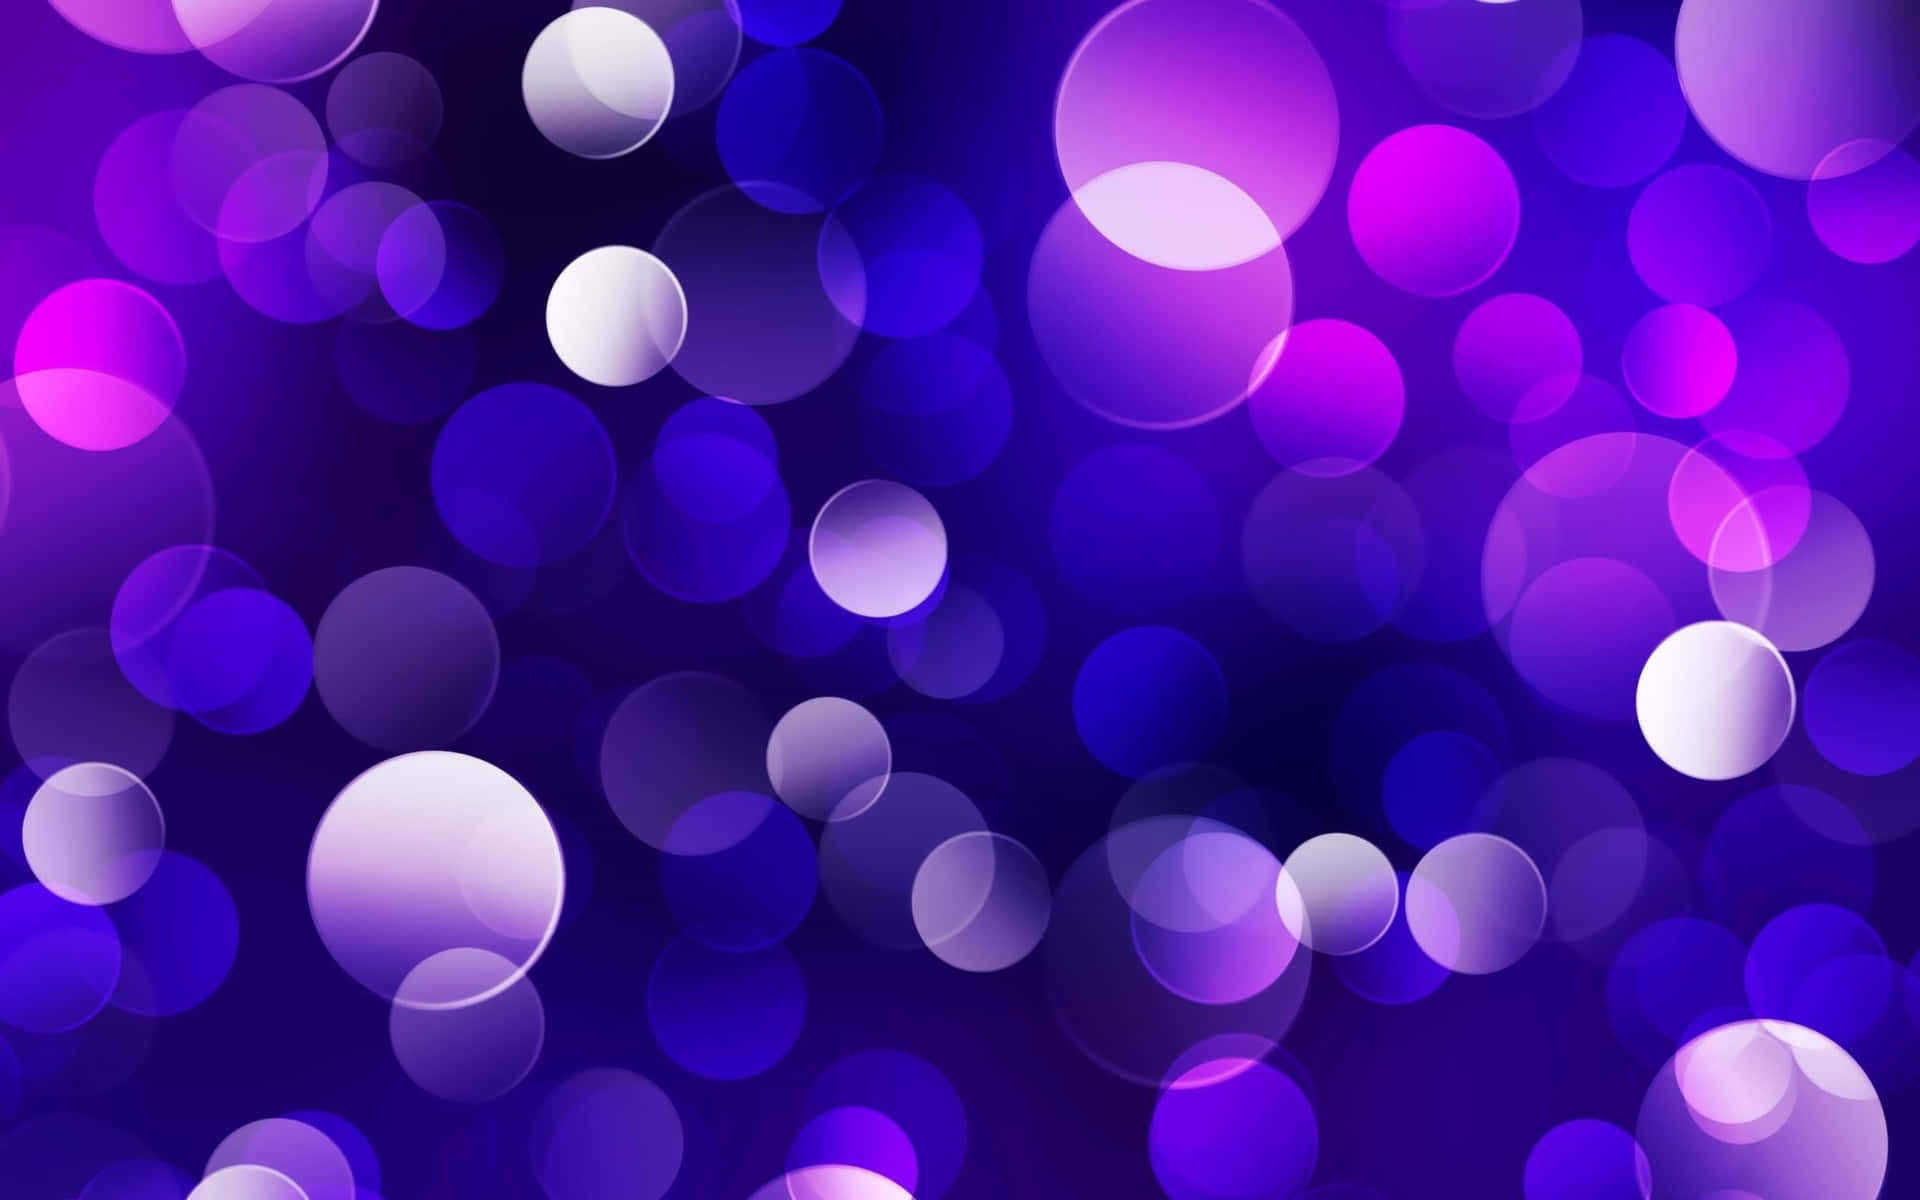 Purple And White Circles On A Purple Background